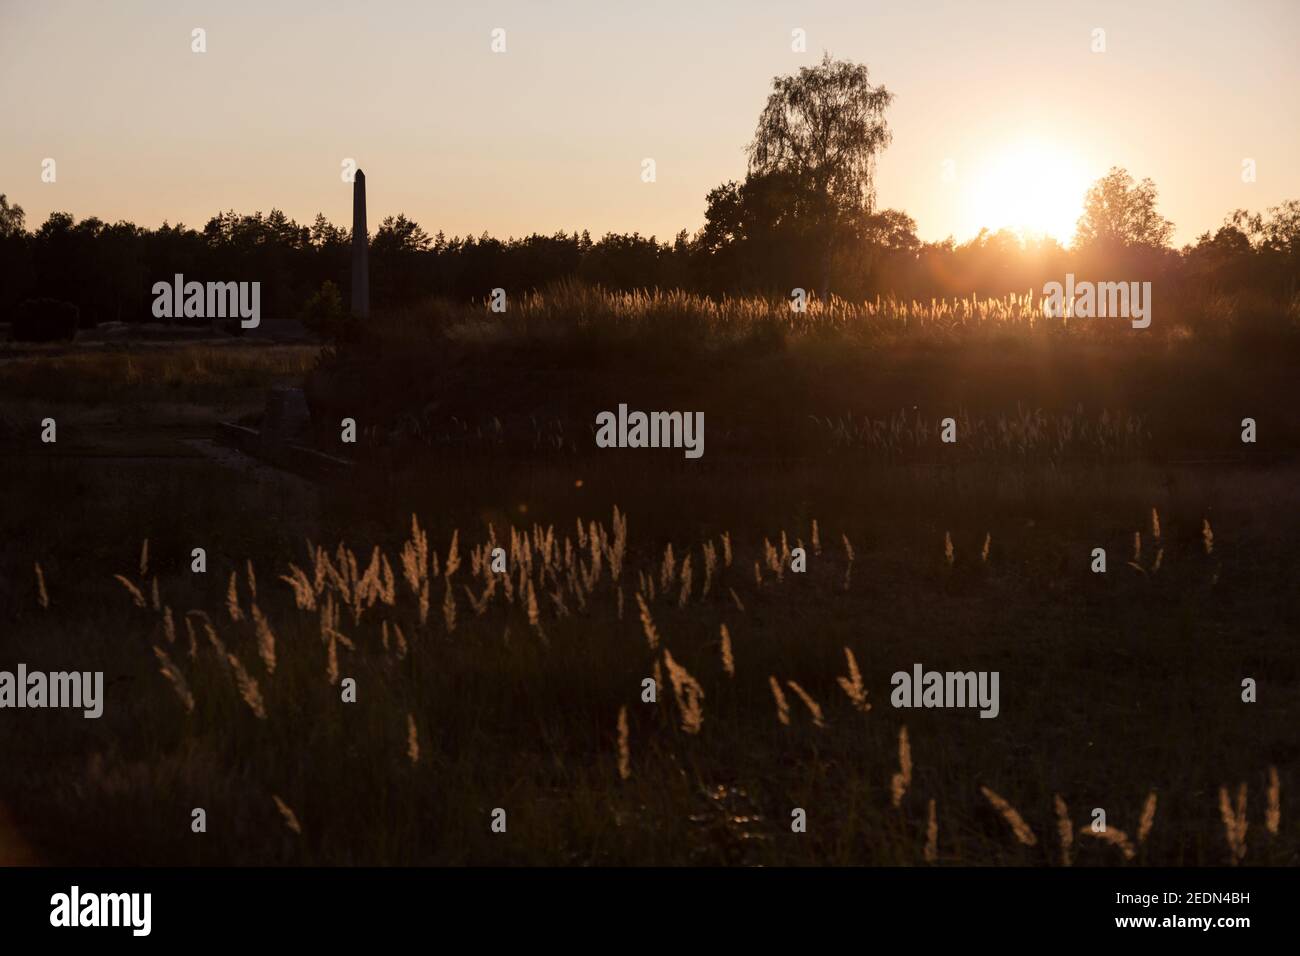 19.09.2020, Lohheide, Lower Saxony, Germany - Bergen-Belsen memorial, obelisk in the evening sun, in front of it mass graves with thousands of dead. I Stock Photo